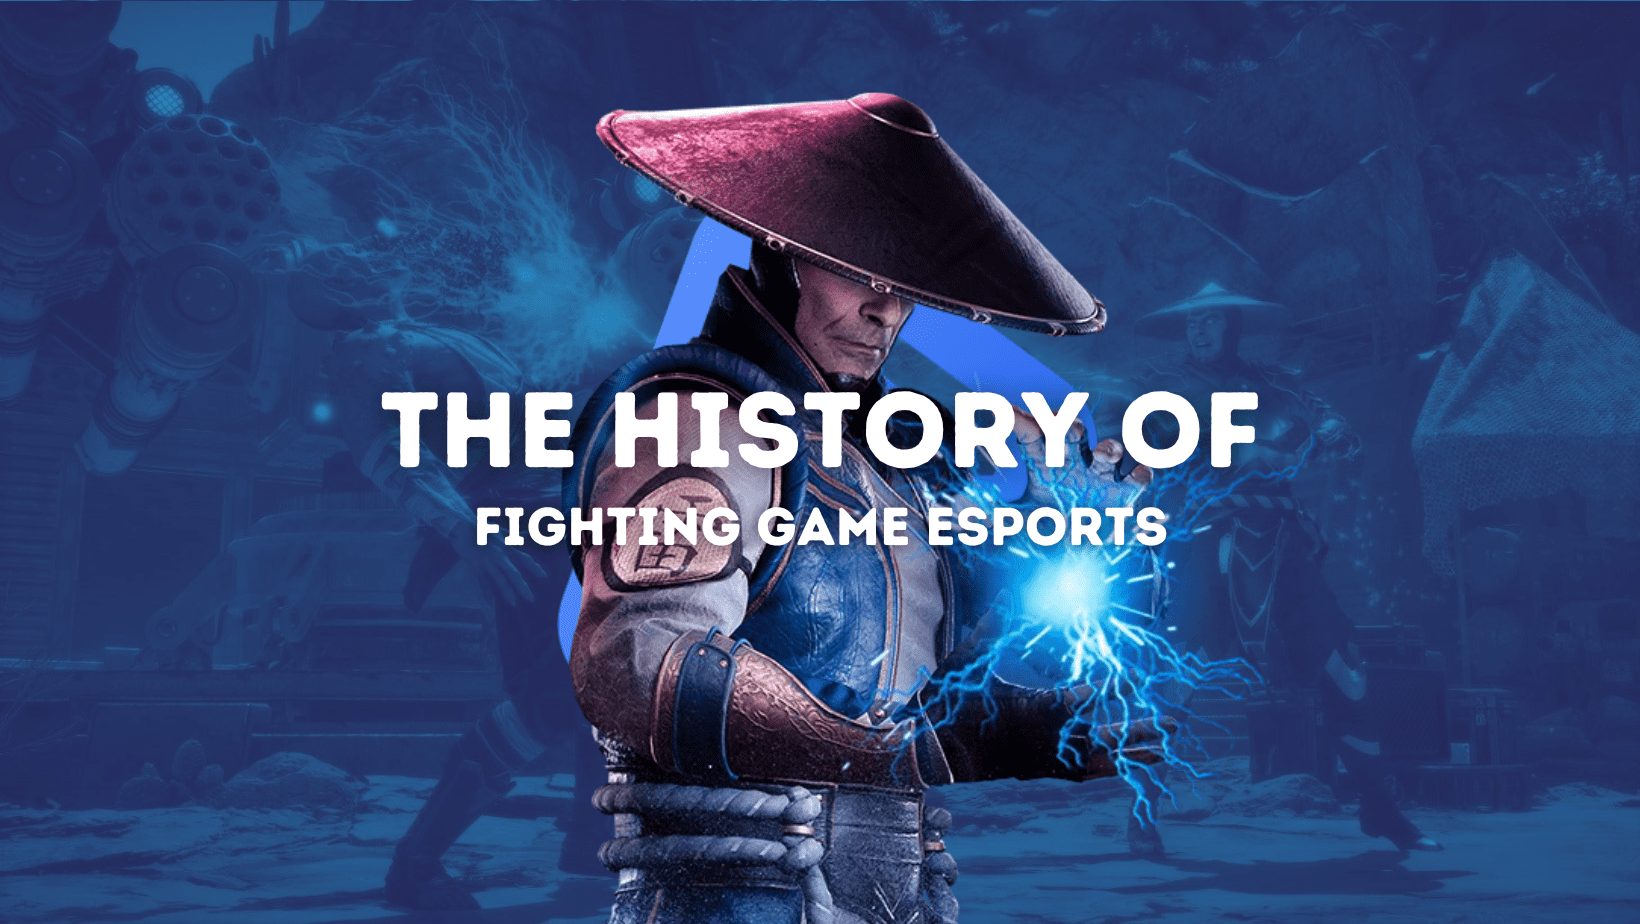 The History of Fighting Game Esports